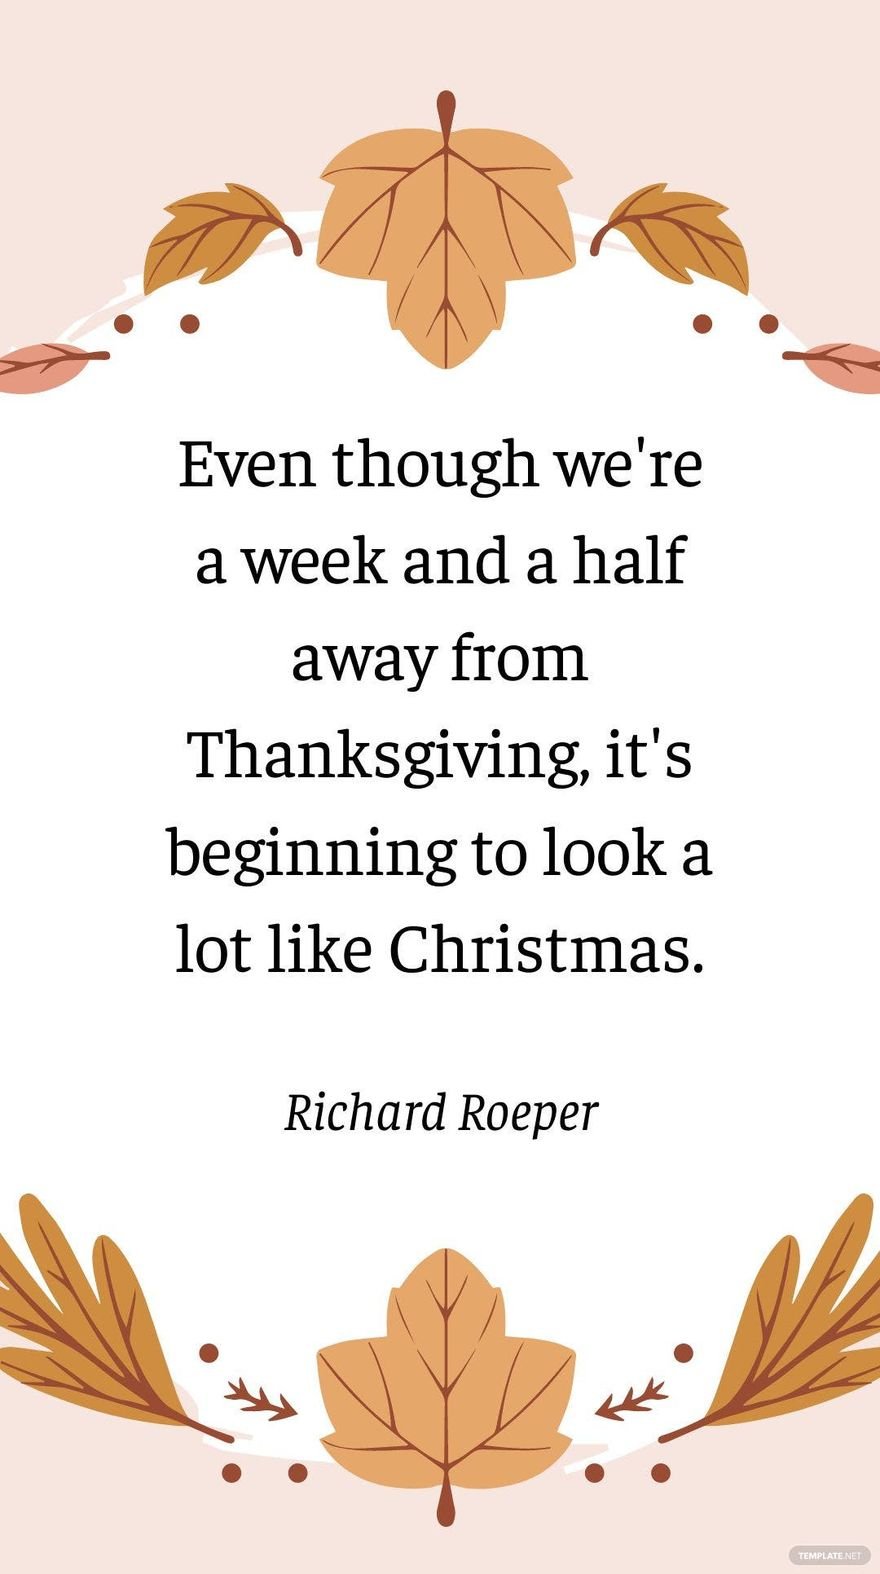 Richard Roeper - Even though we're a week and a half away from Thanksgiving, it's beginning to look a lot like Christmas.